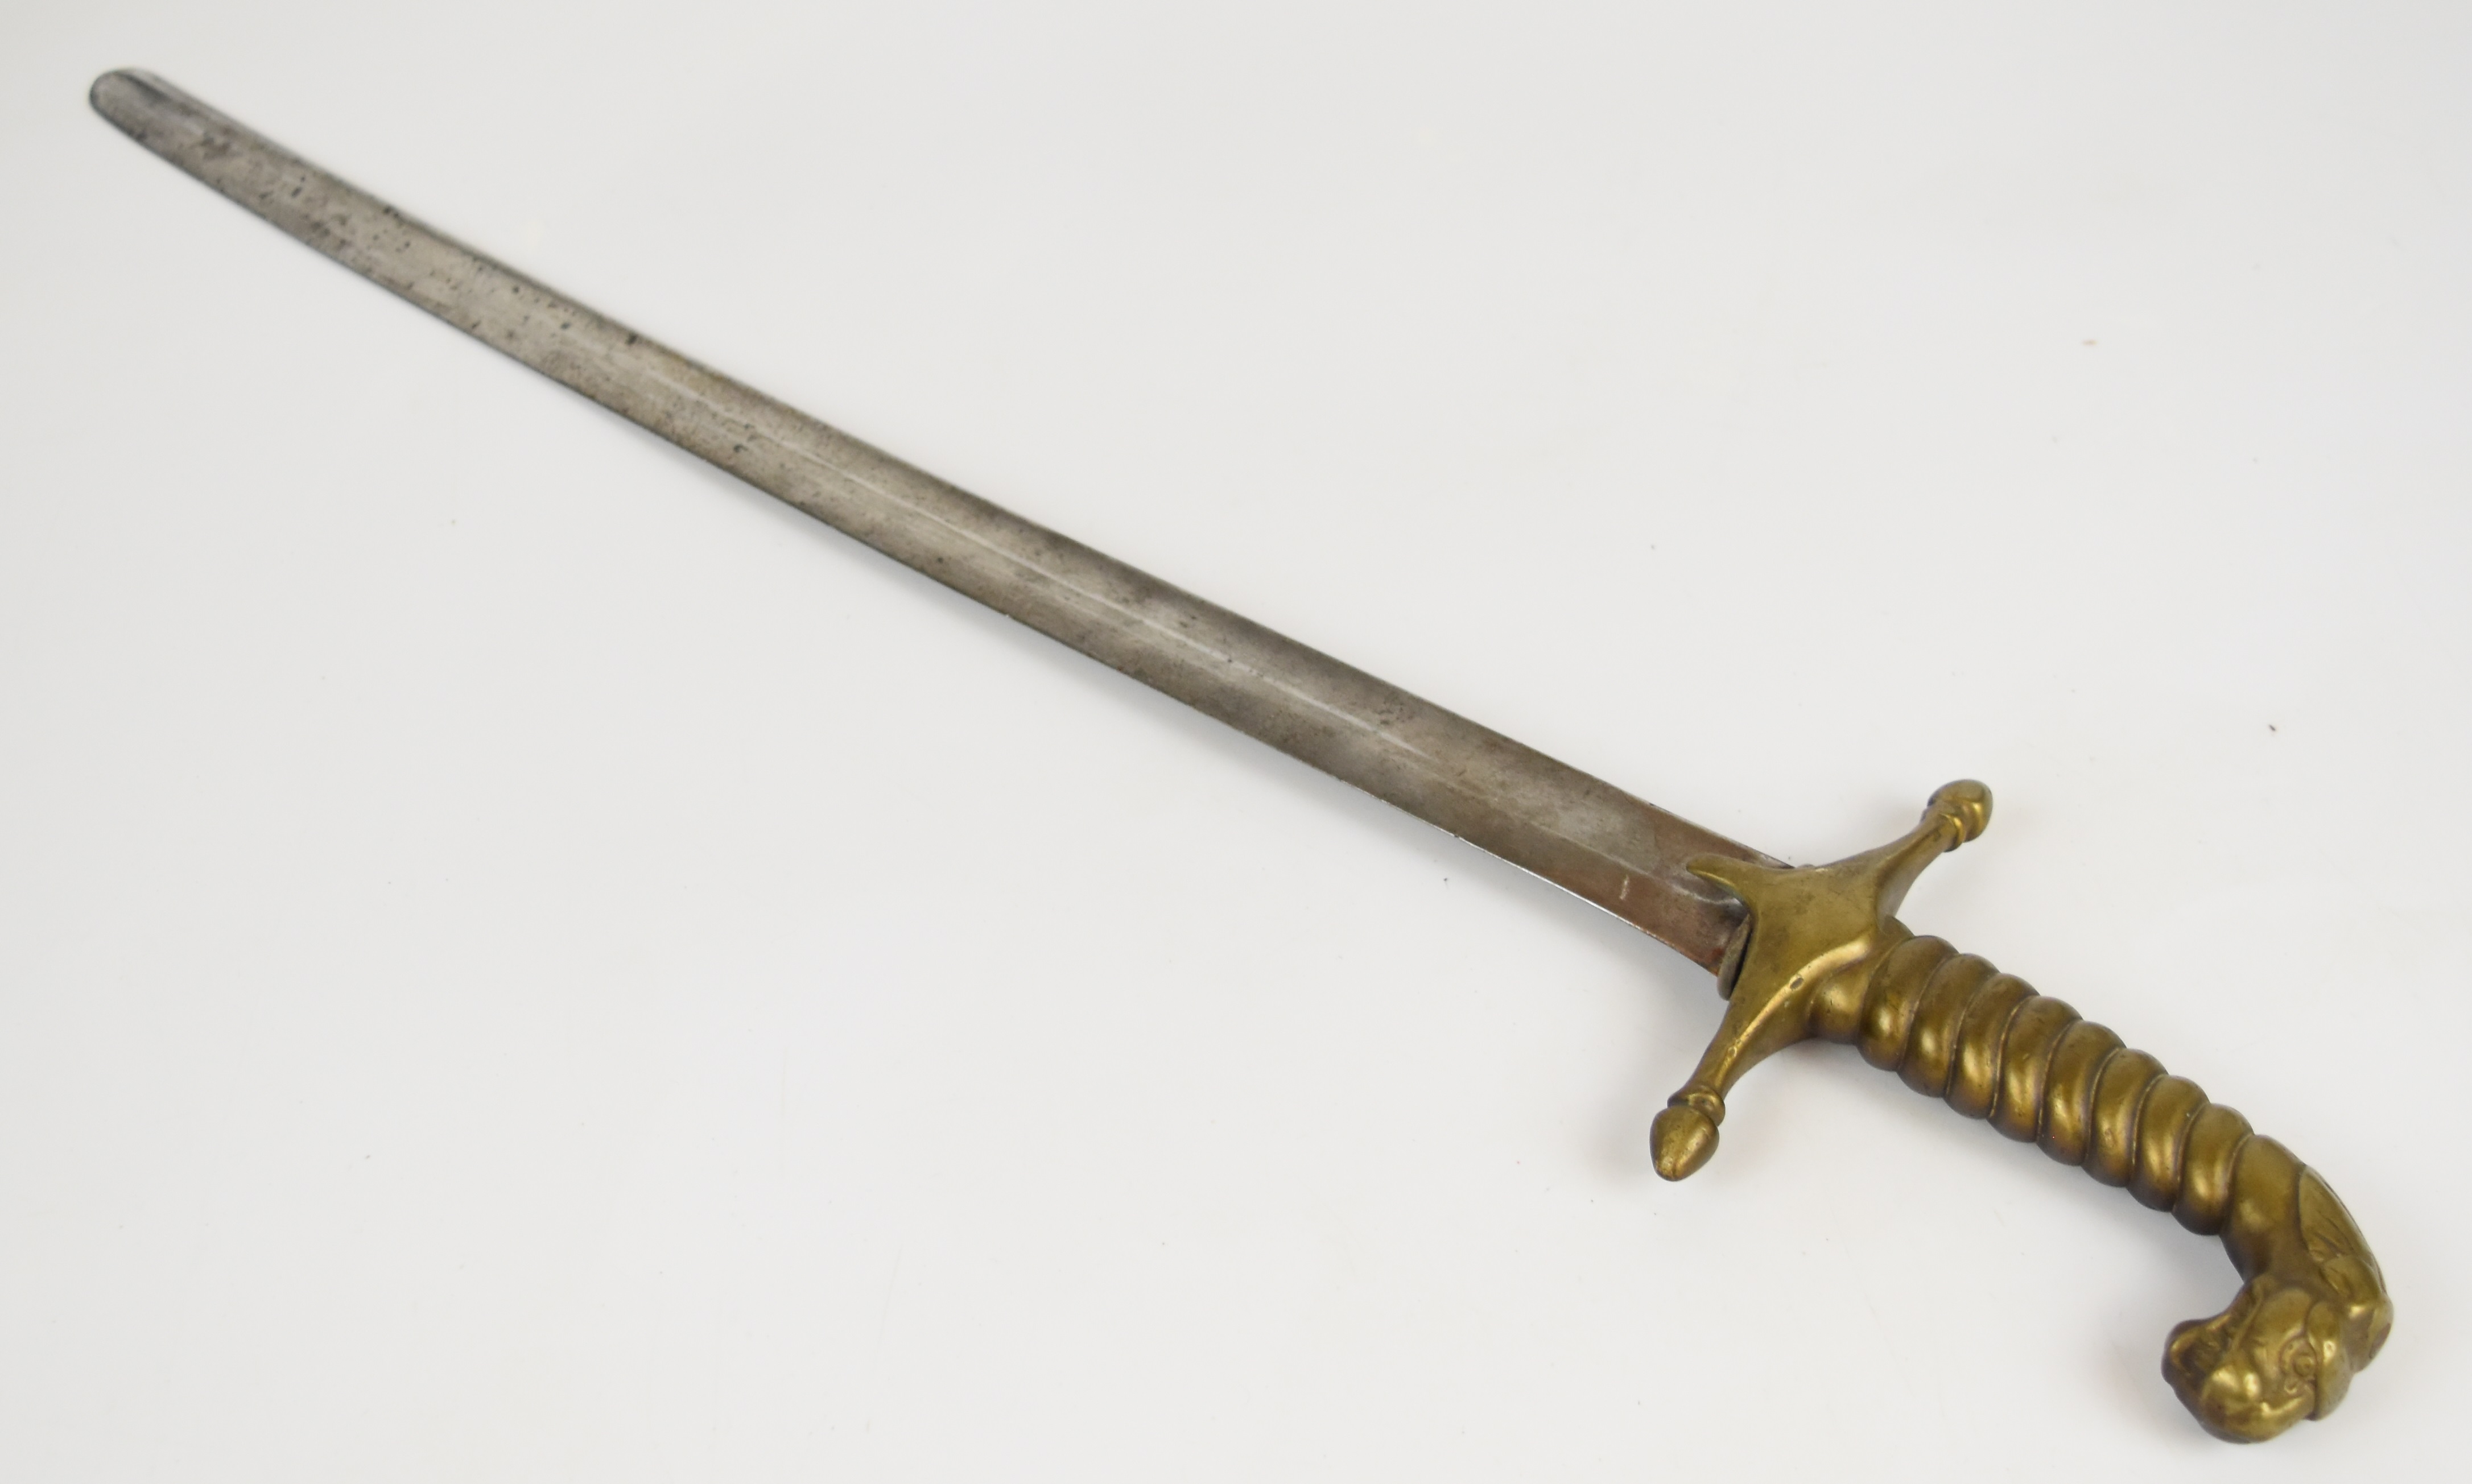 Naval type dirk with lion head pommel, brass grip and crosspiece, 50cm fullered single edged blade - Image 3 of 8